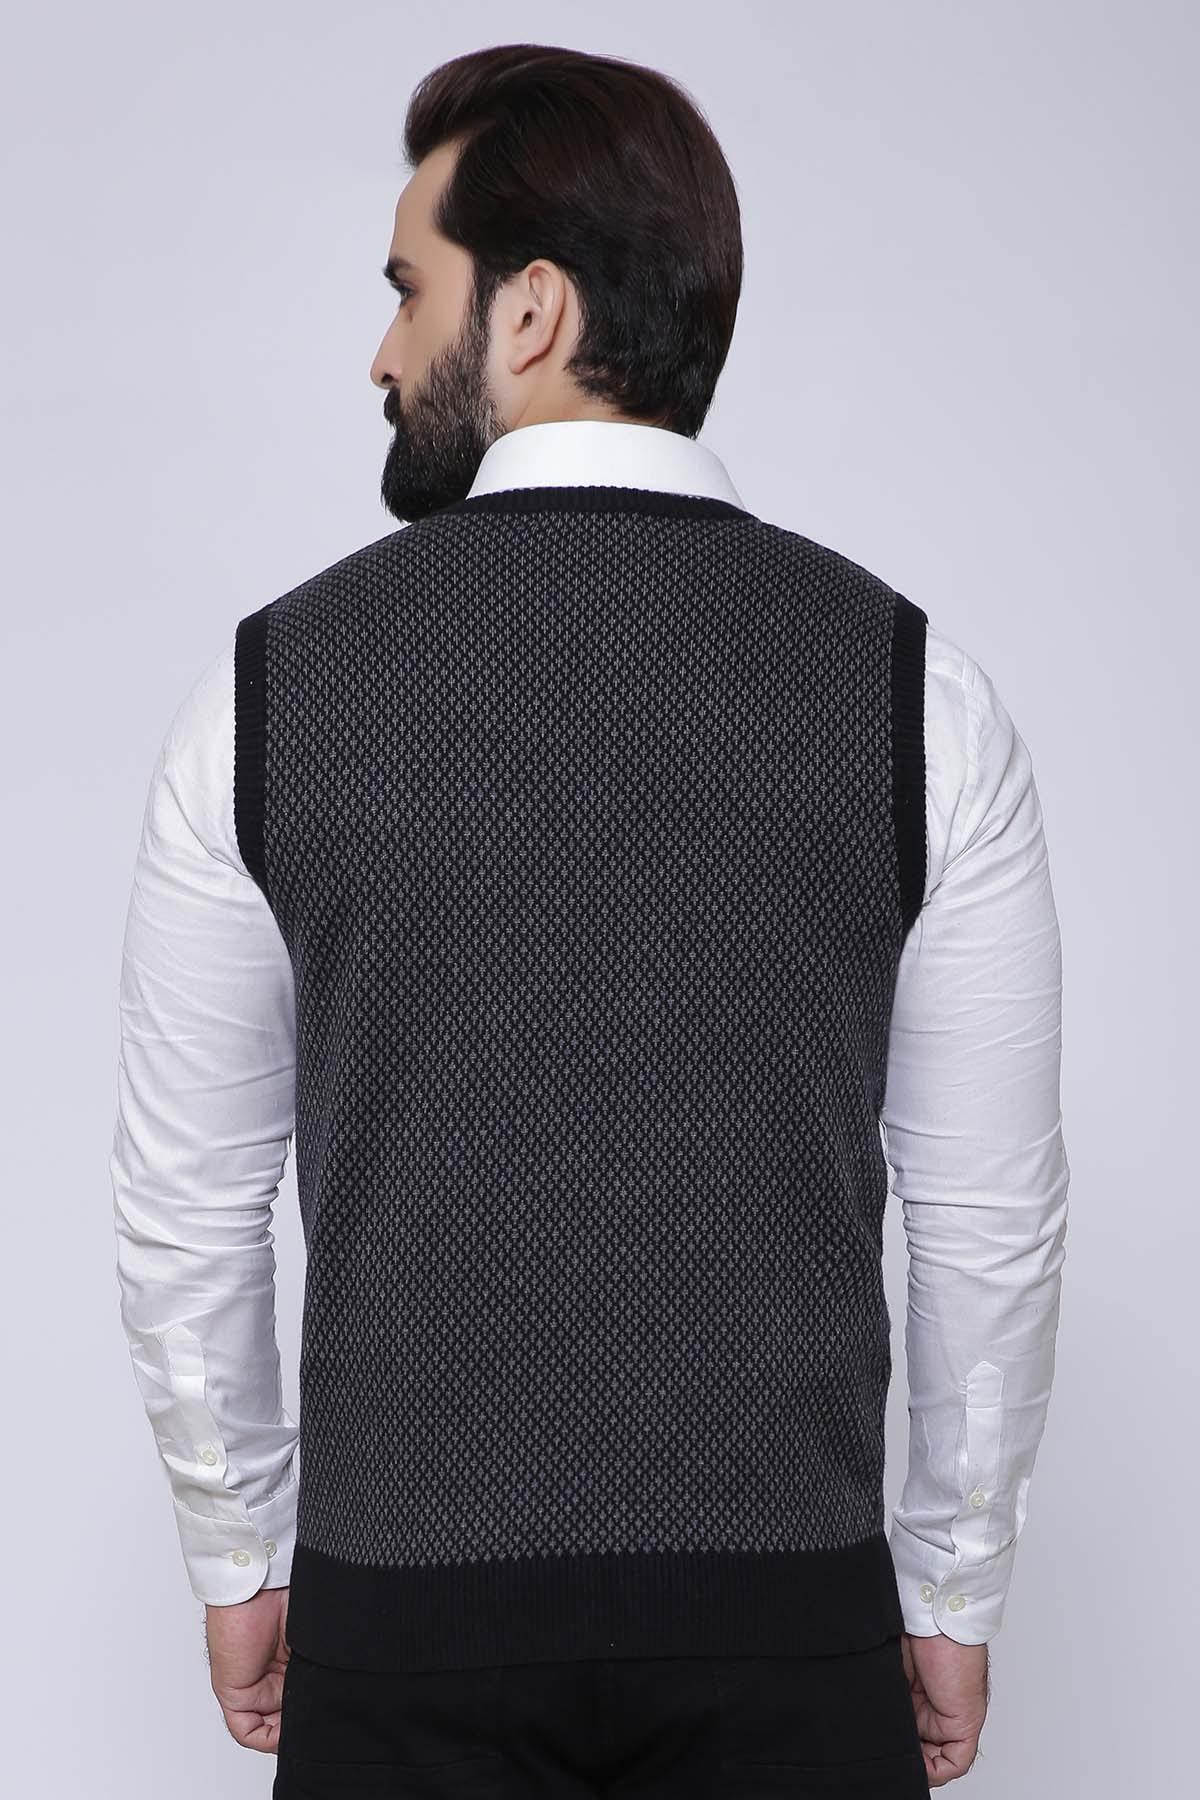 SWEATER V NECK SLEEVE LESS BLACK GREY at Charcoal Clothing